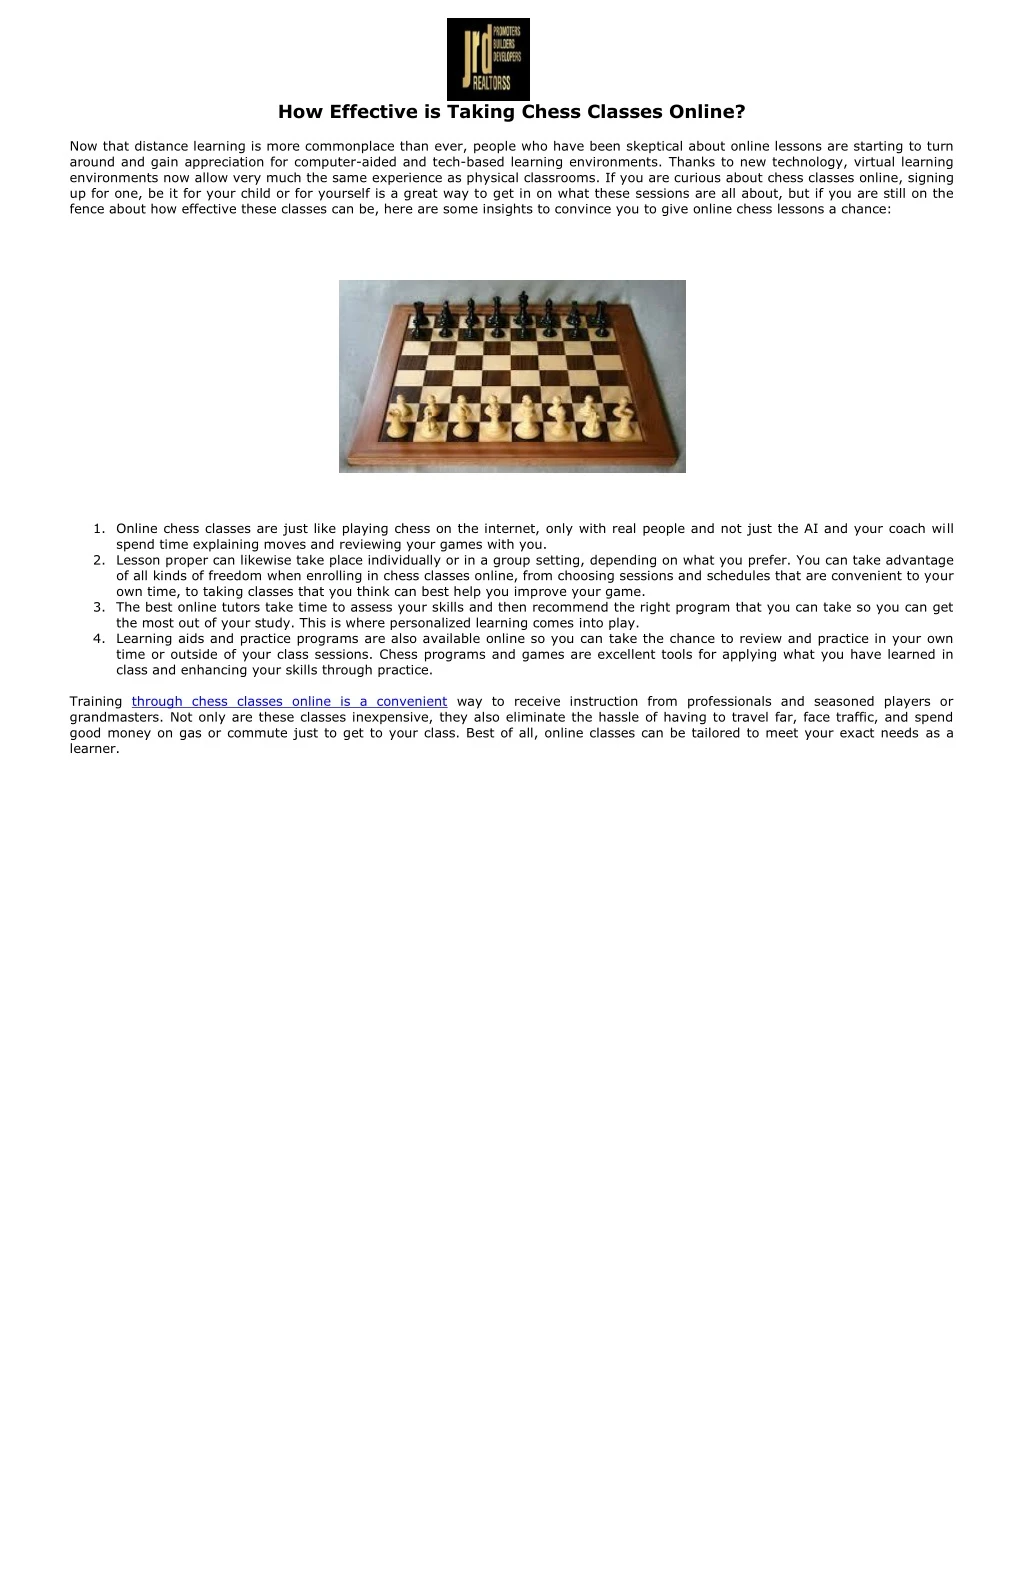 how effective is taking chess classes online